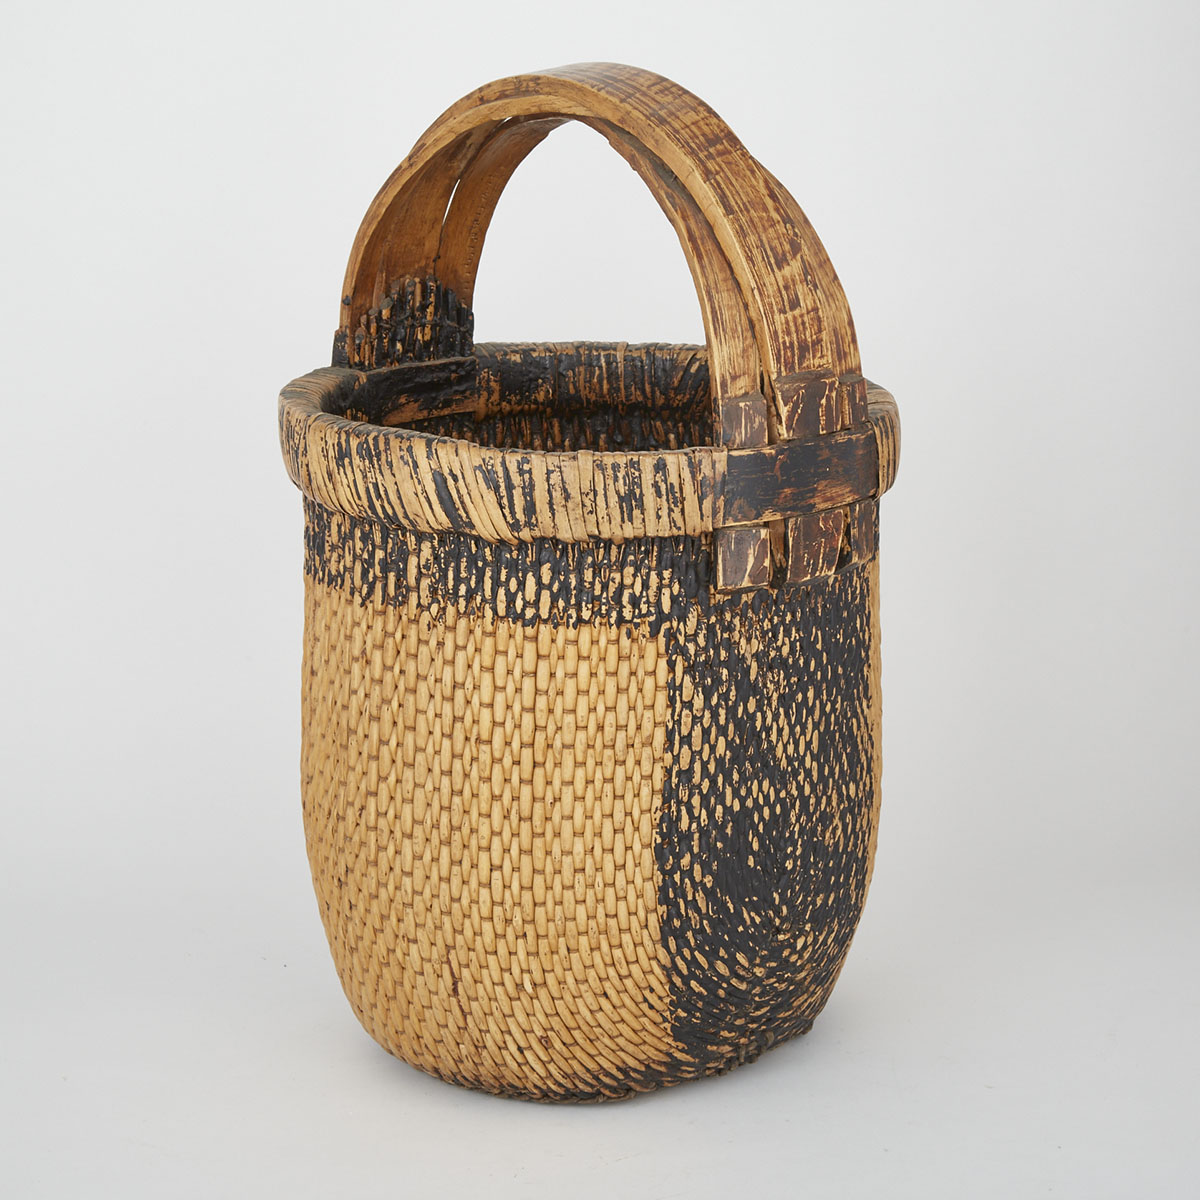 Woven Bamboo Basket, Early 20th Century